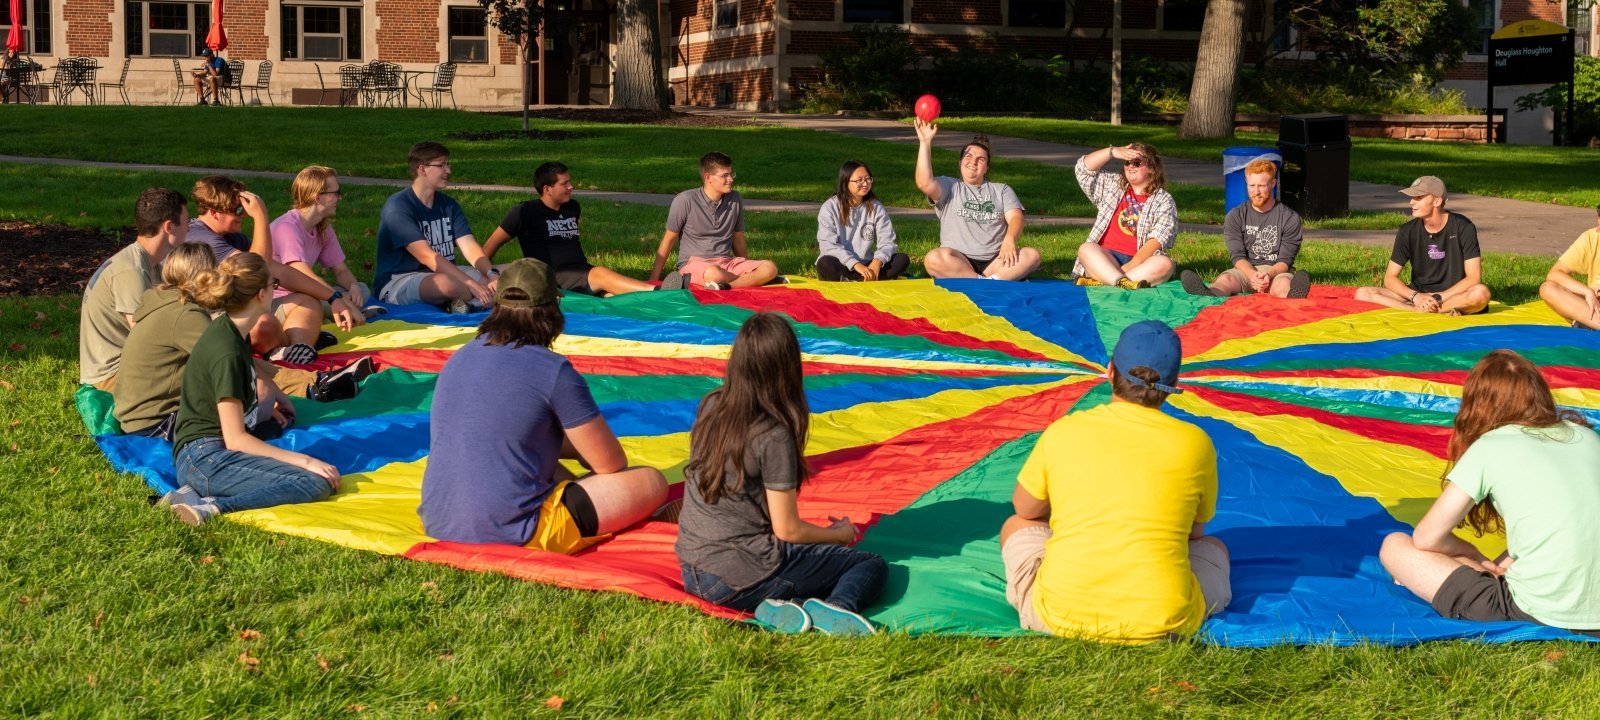 Students sitting on a multicolored parachute playing a game